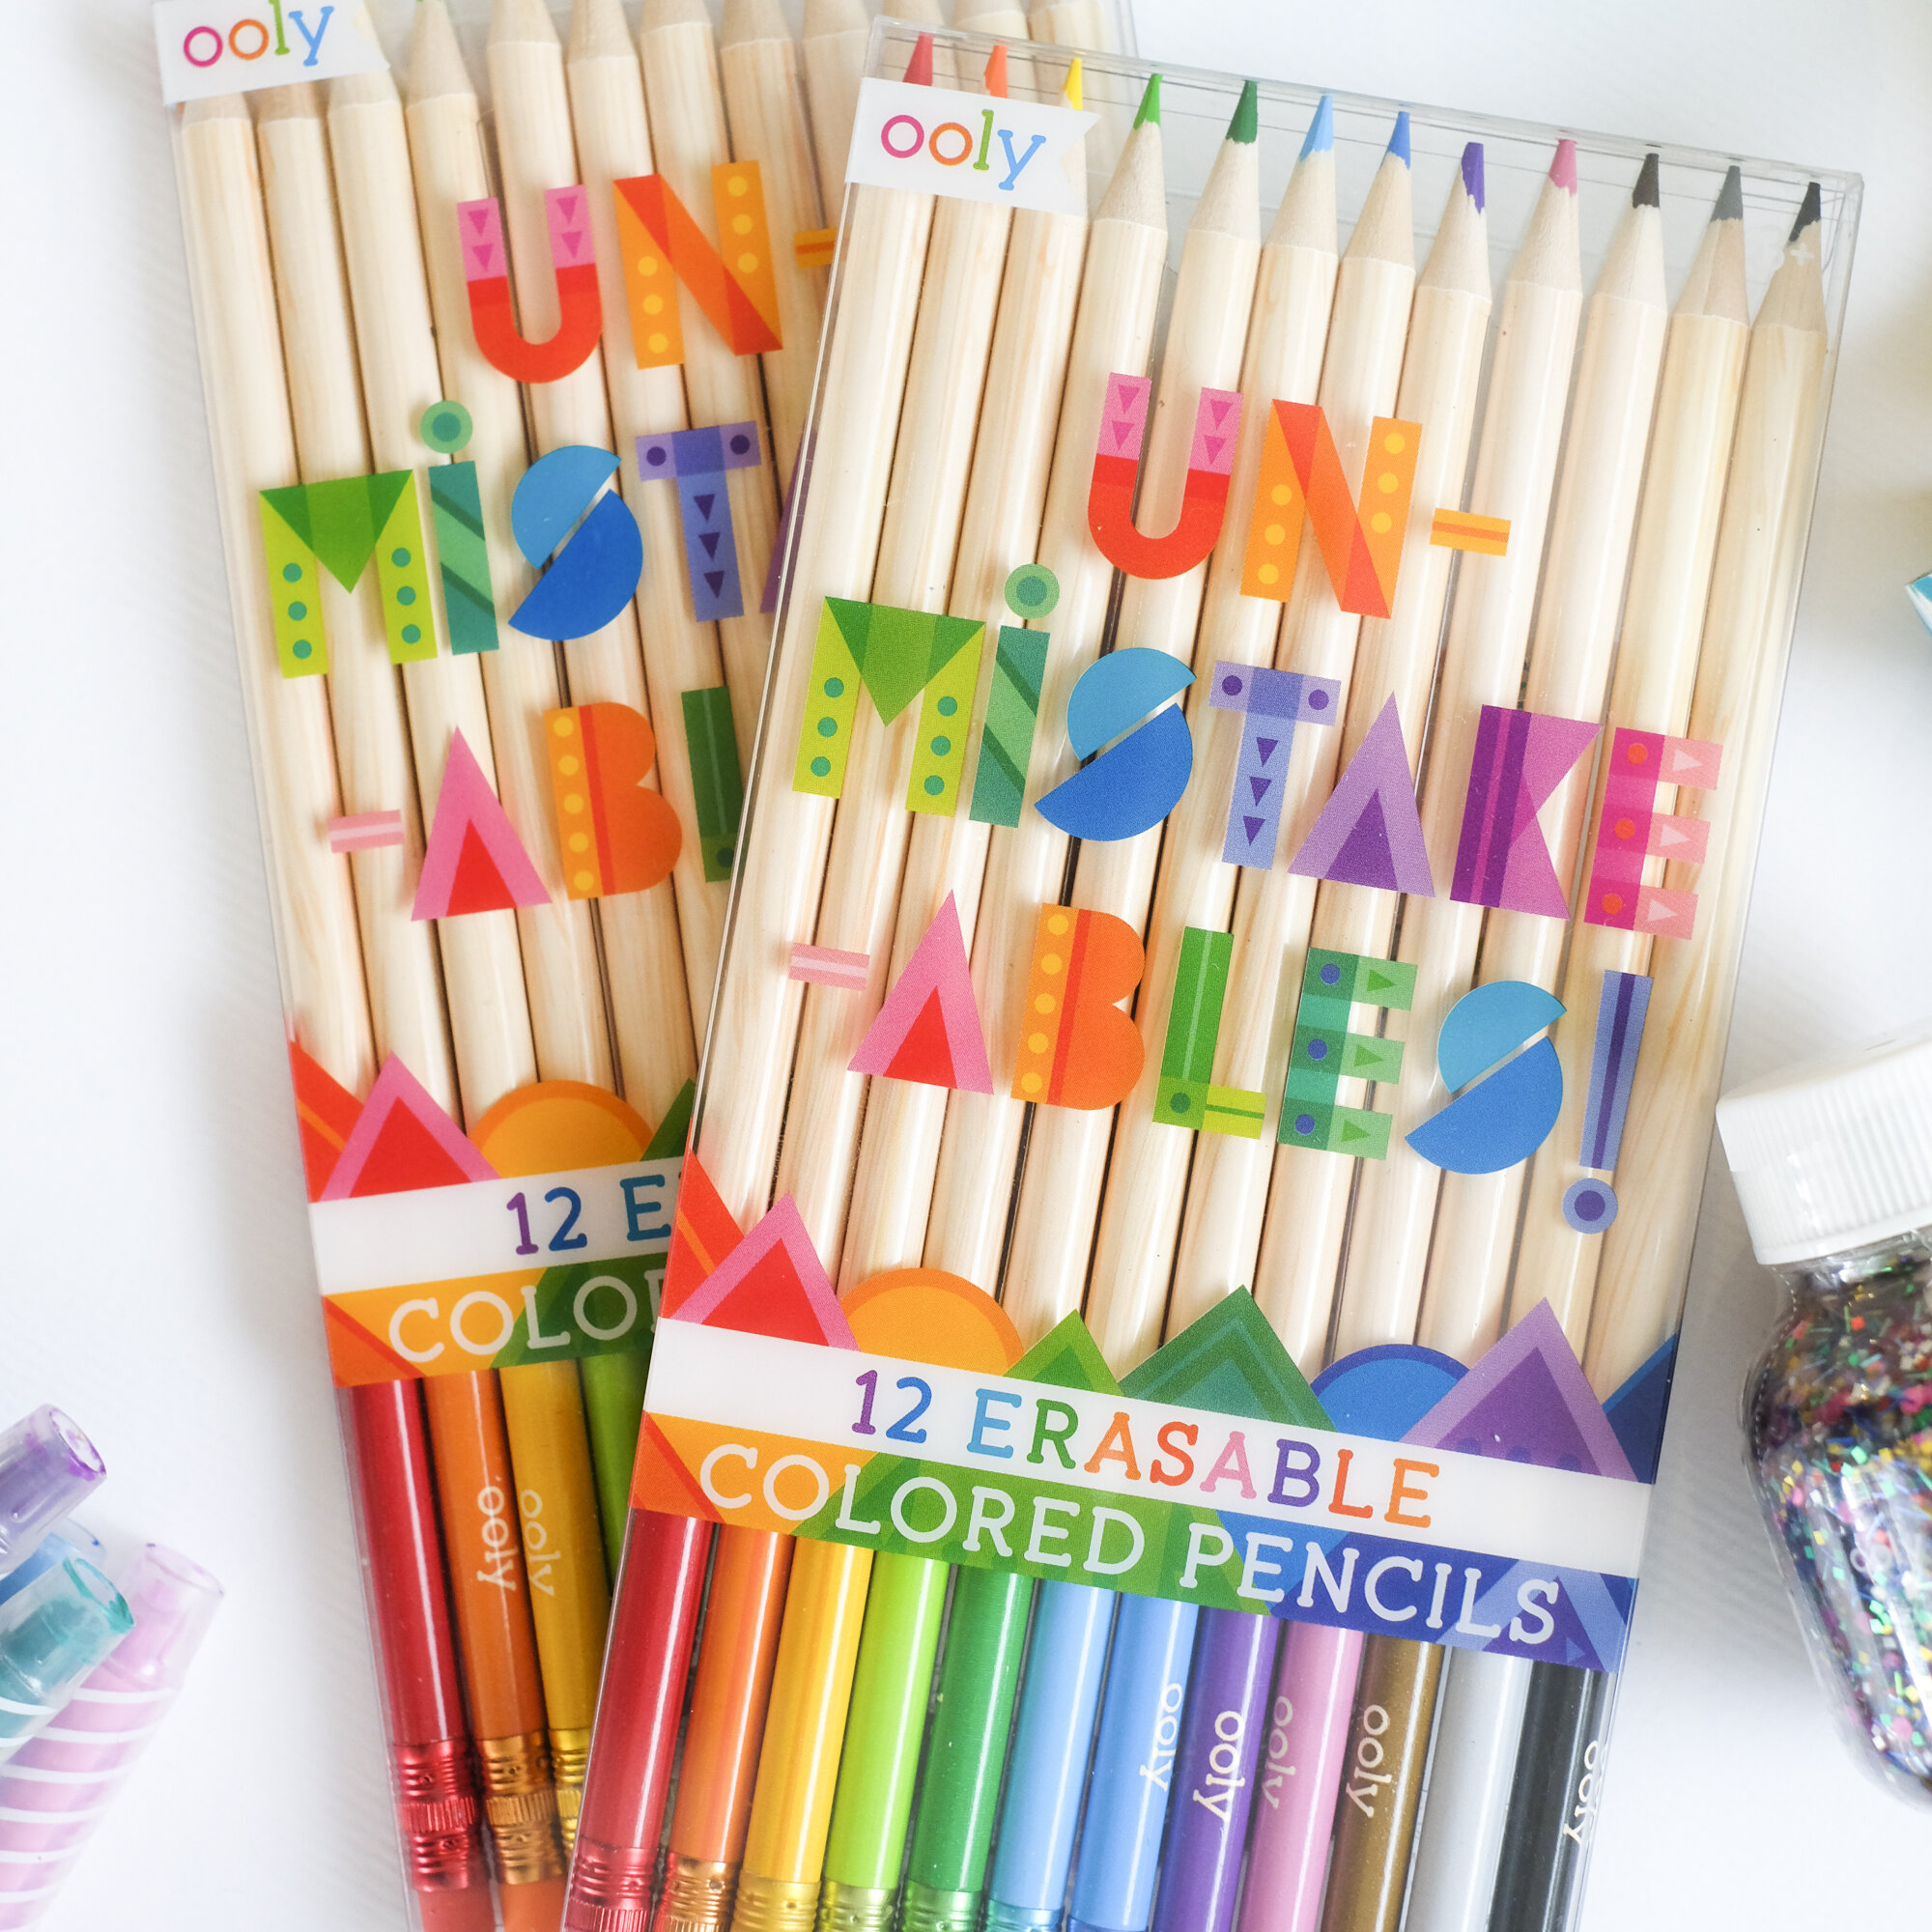 Set of 12 Ooly UnMistakeAbles Erasable Colored Pencils